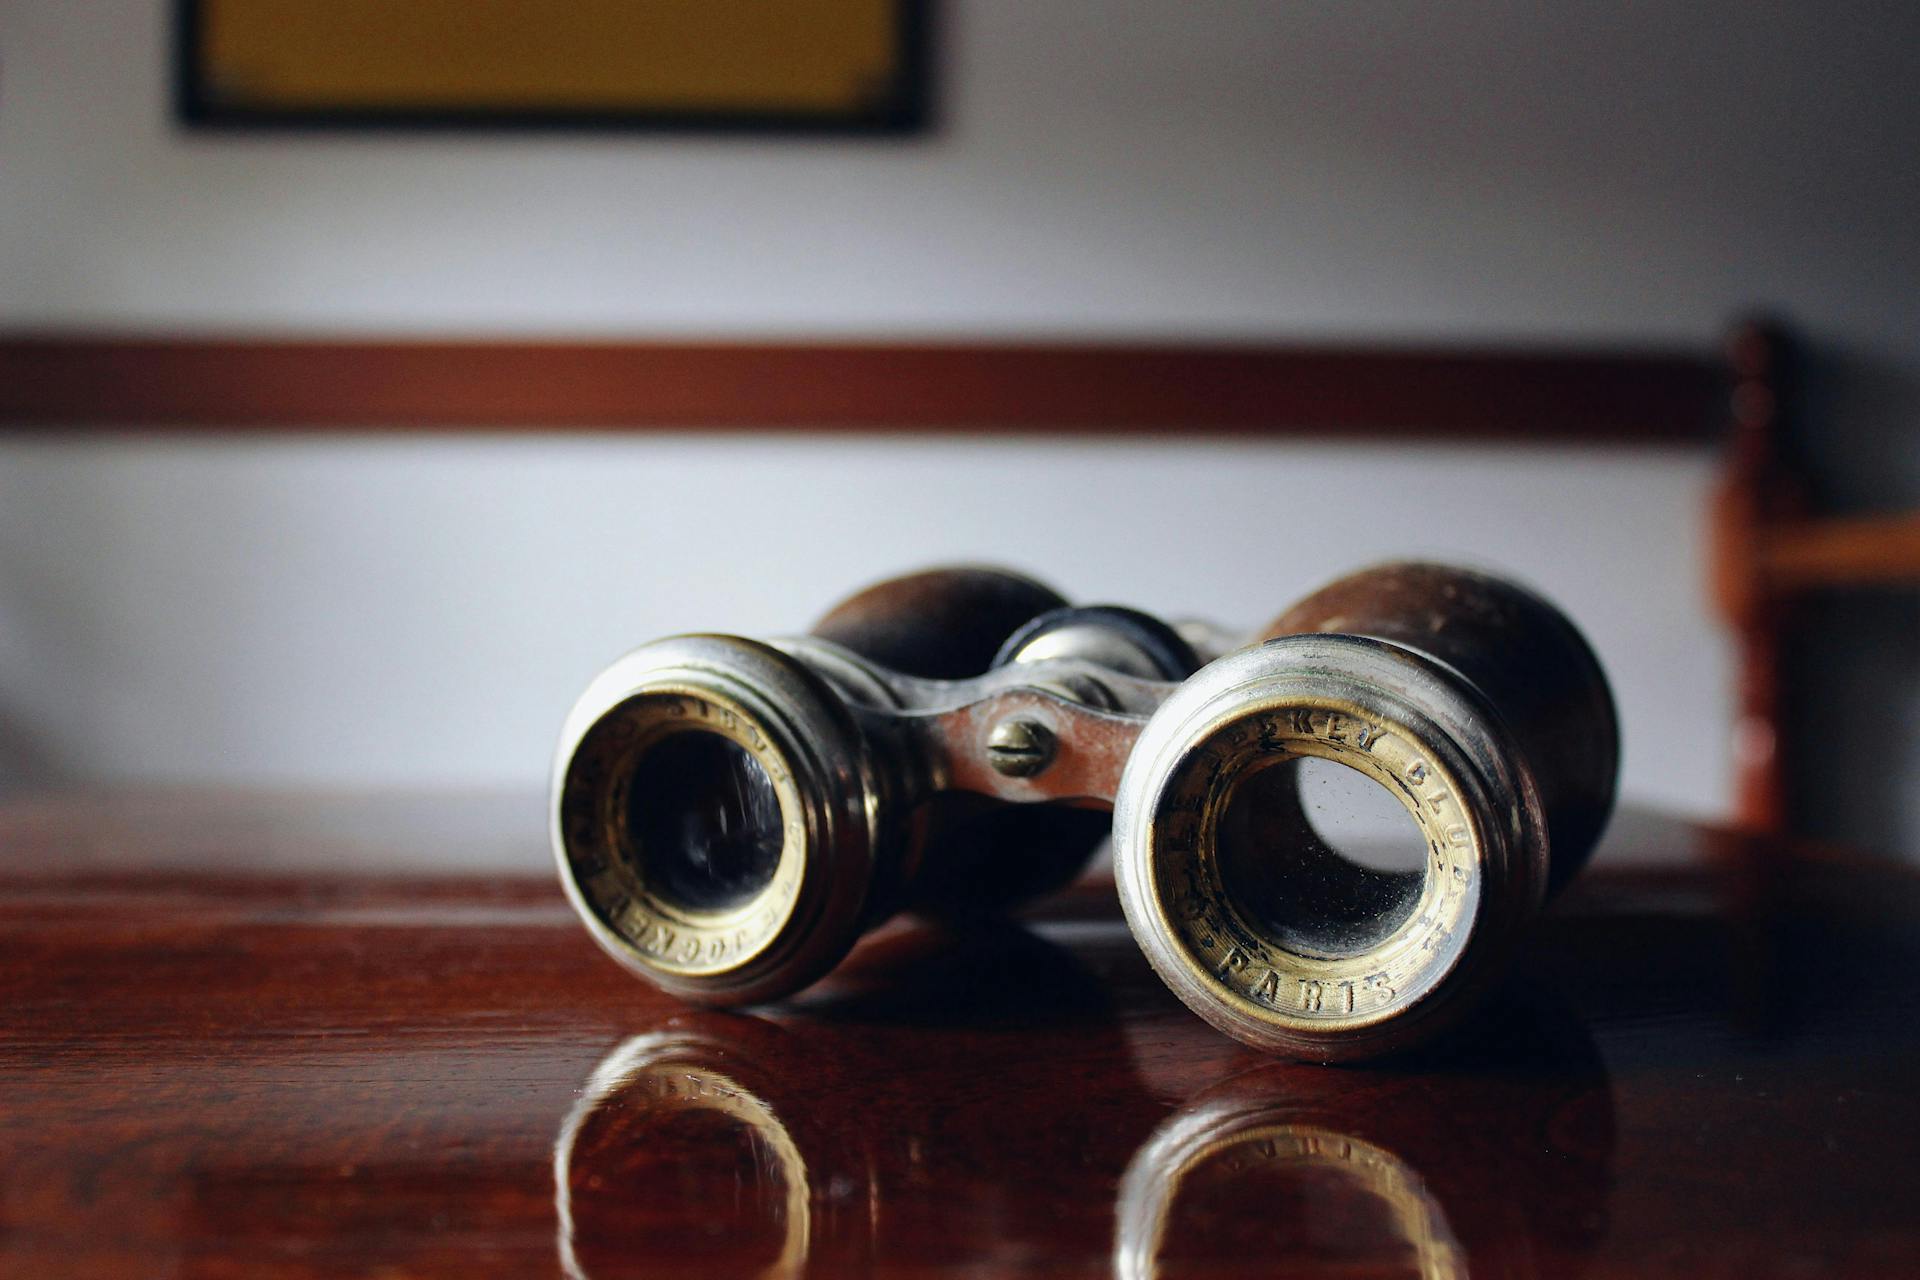 Pair of antique binoculares on a table. Monitoring the reaction to your content is key for content strategy.